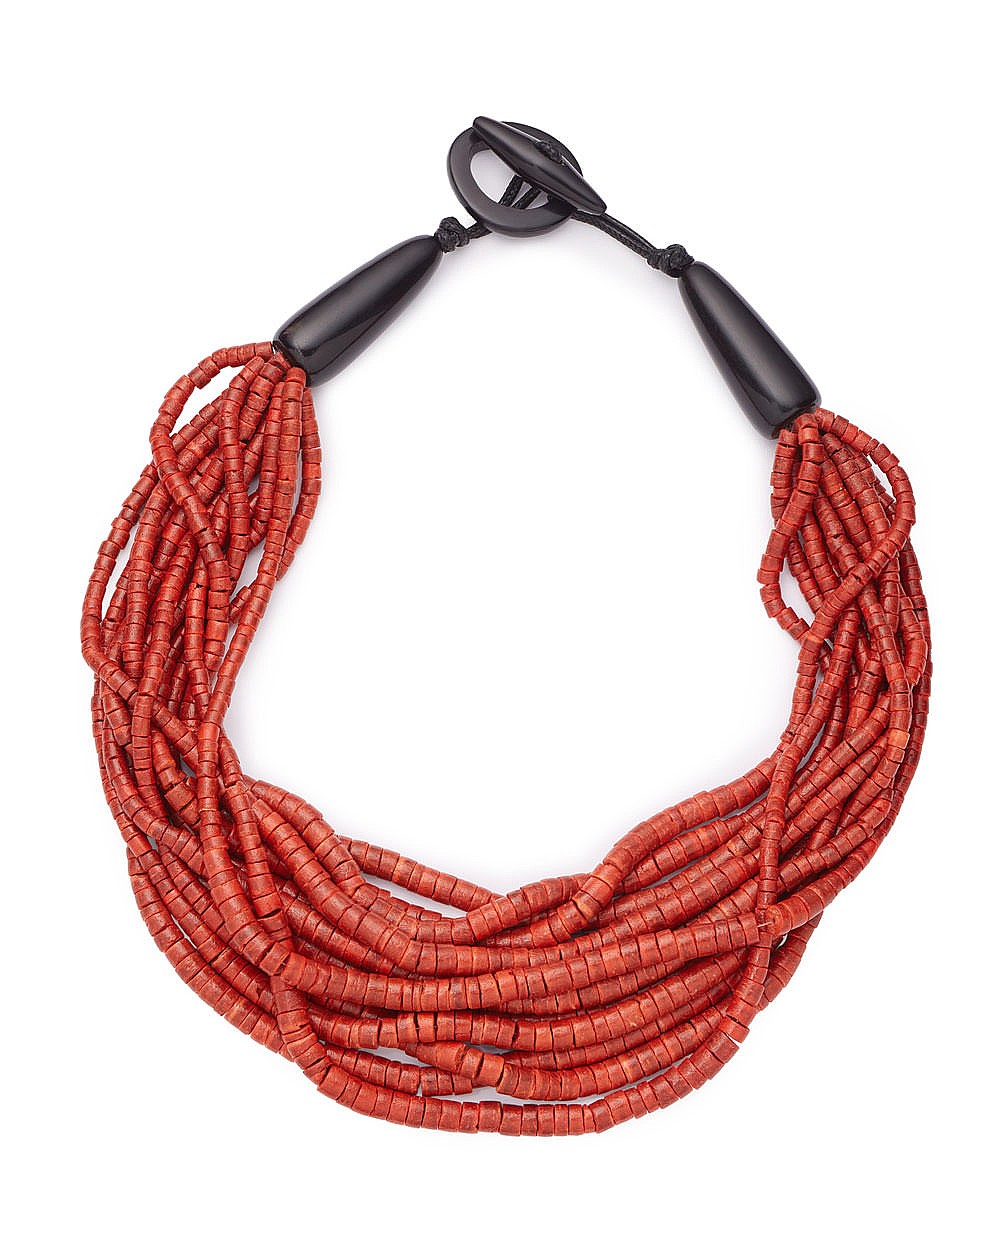 EAST Layered Bead Necklace